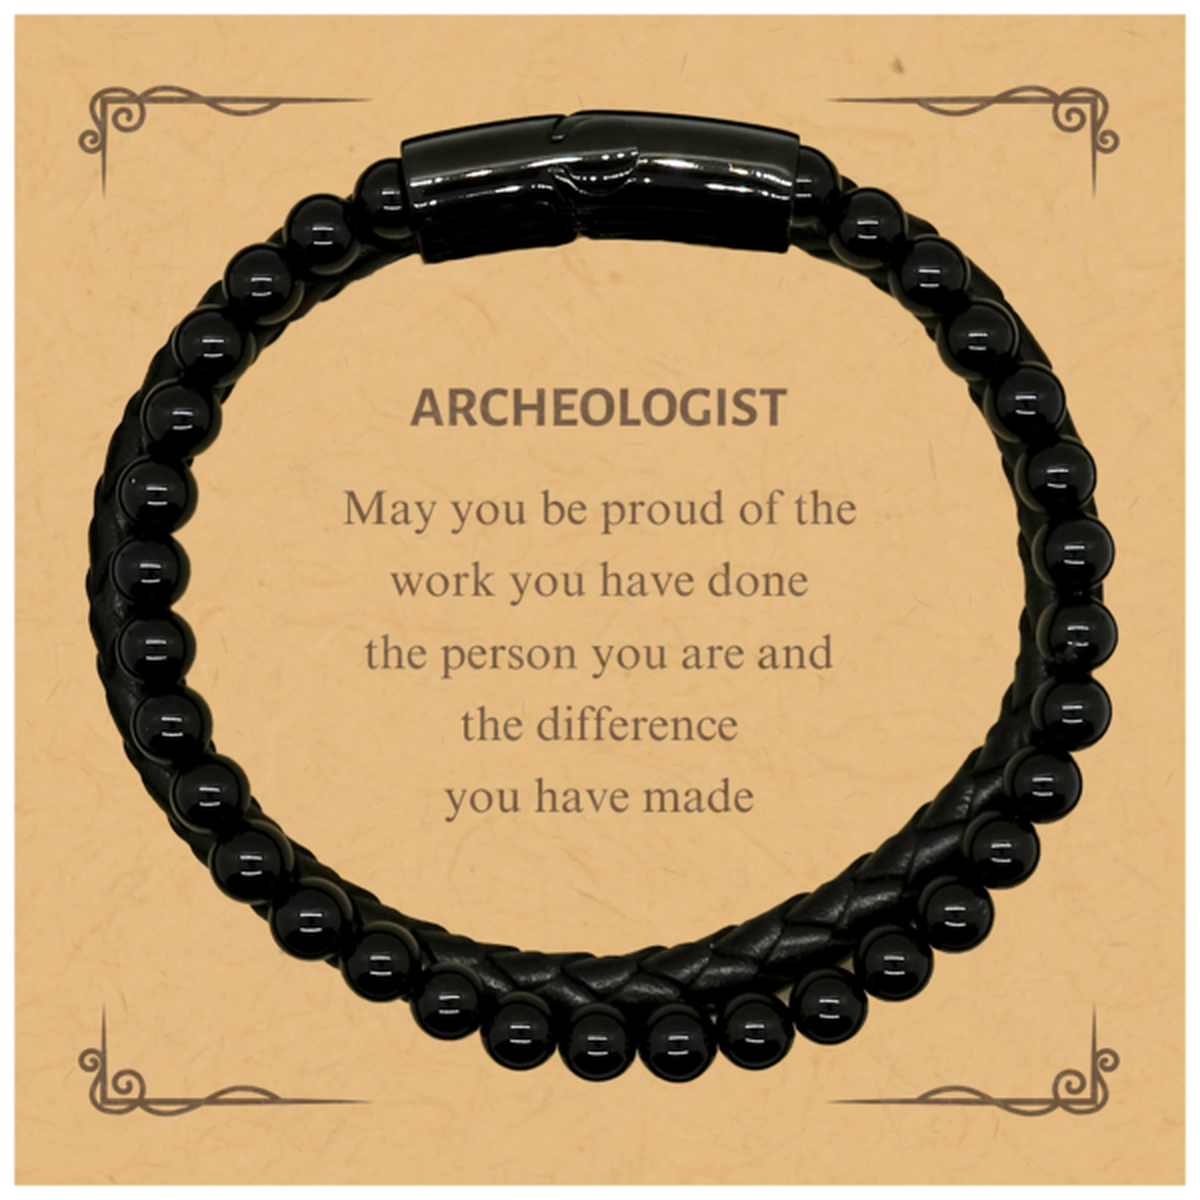 Archeologist May you be proud of the work you have done, Retirement Archeologist Stone Leather Bracelets for Colleague Appreciation Gifts Amazing for Archeologist